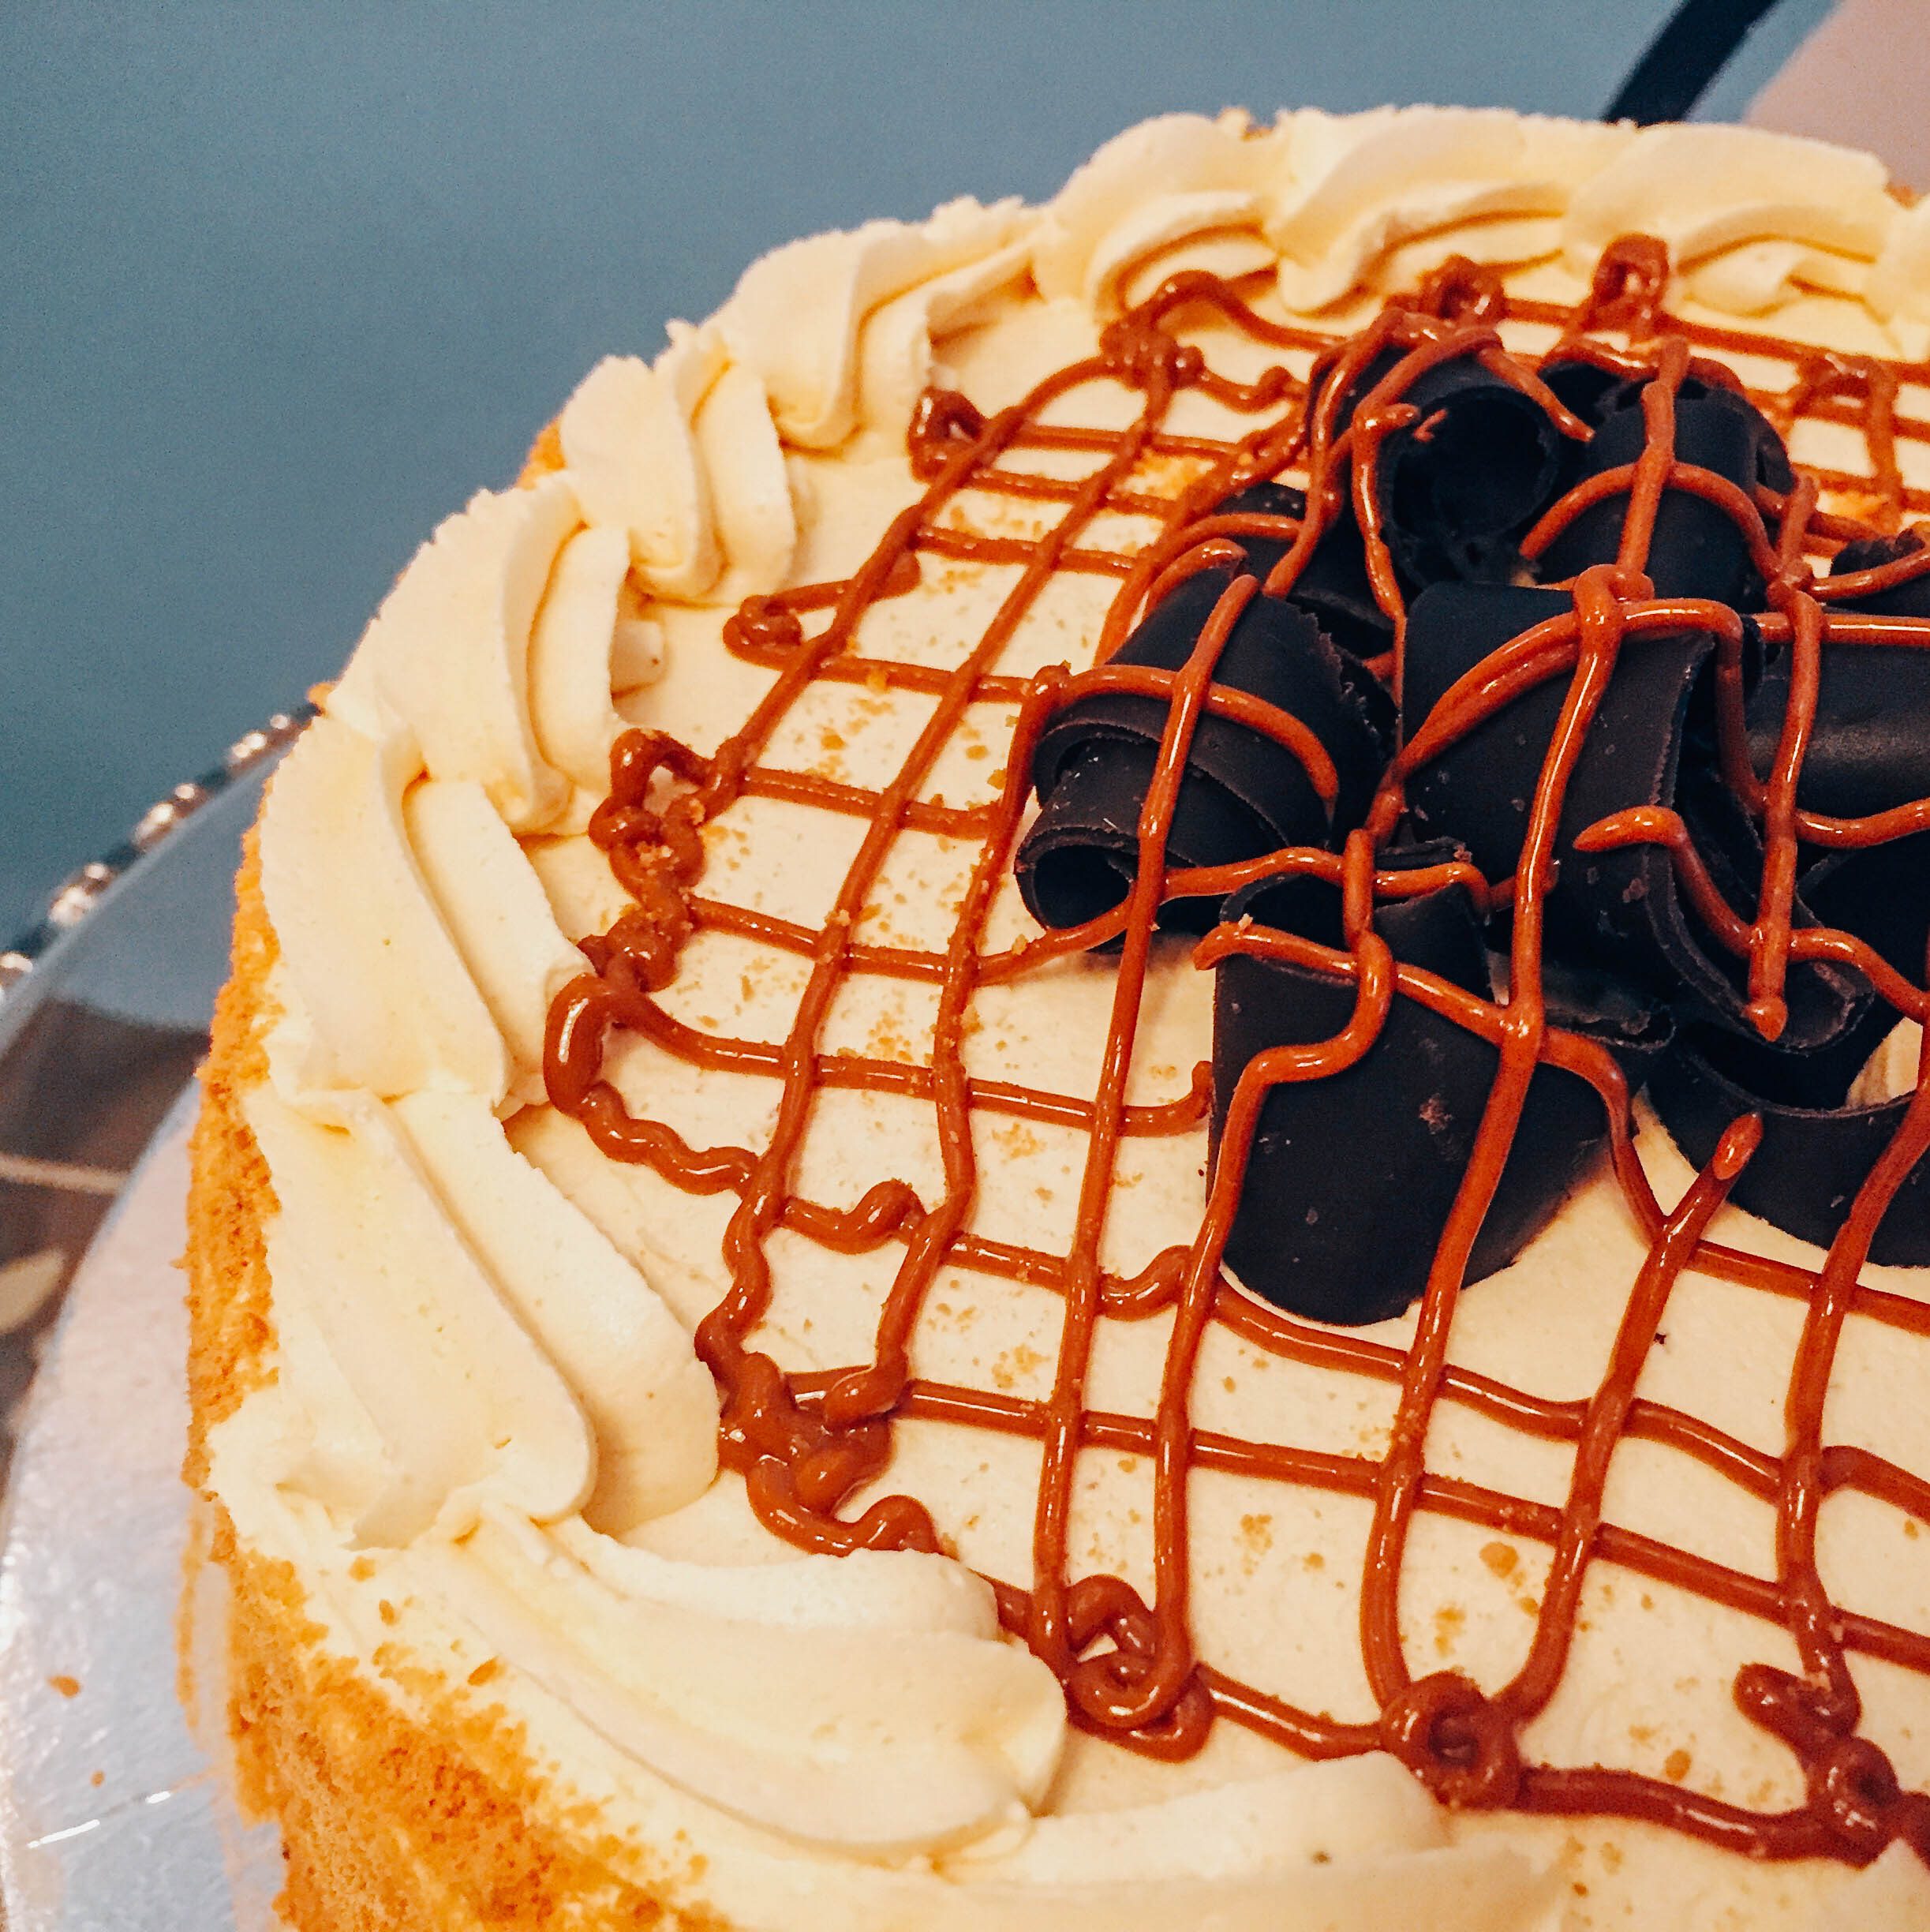 SALTED CARAMEL. A moist, sweet cake toped with chocolate. Photo by Vernise L. Tantuco/Rappler 